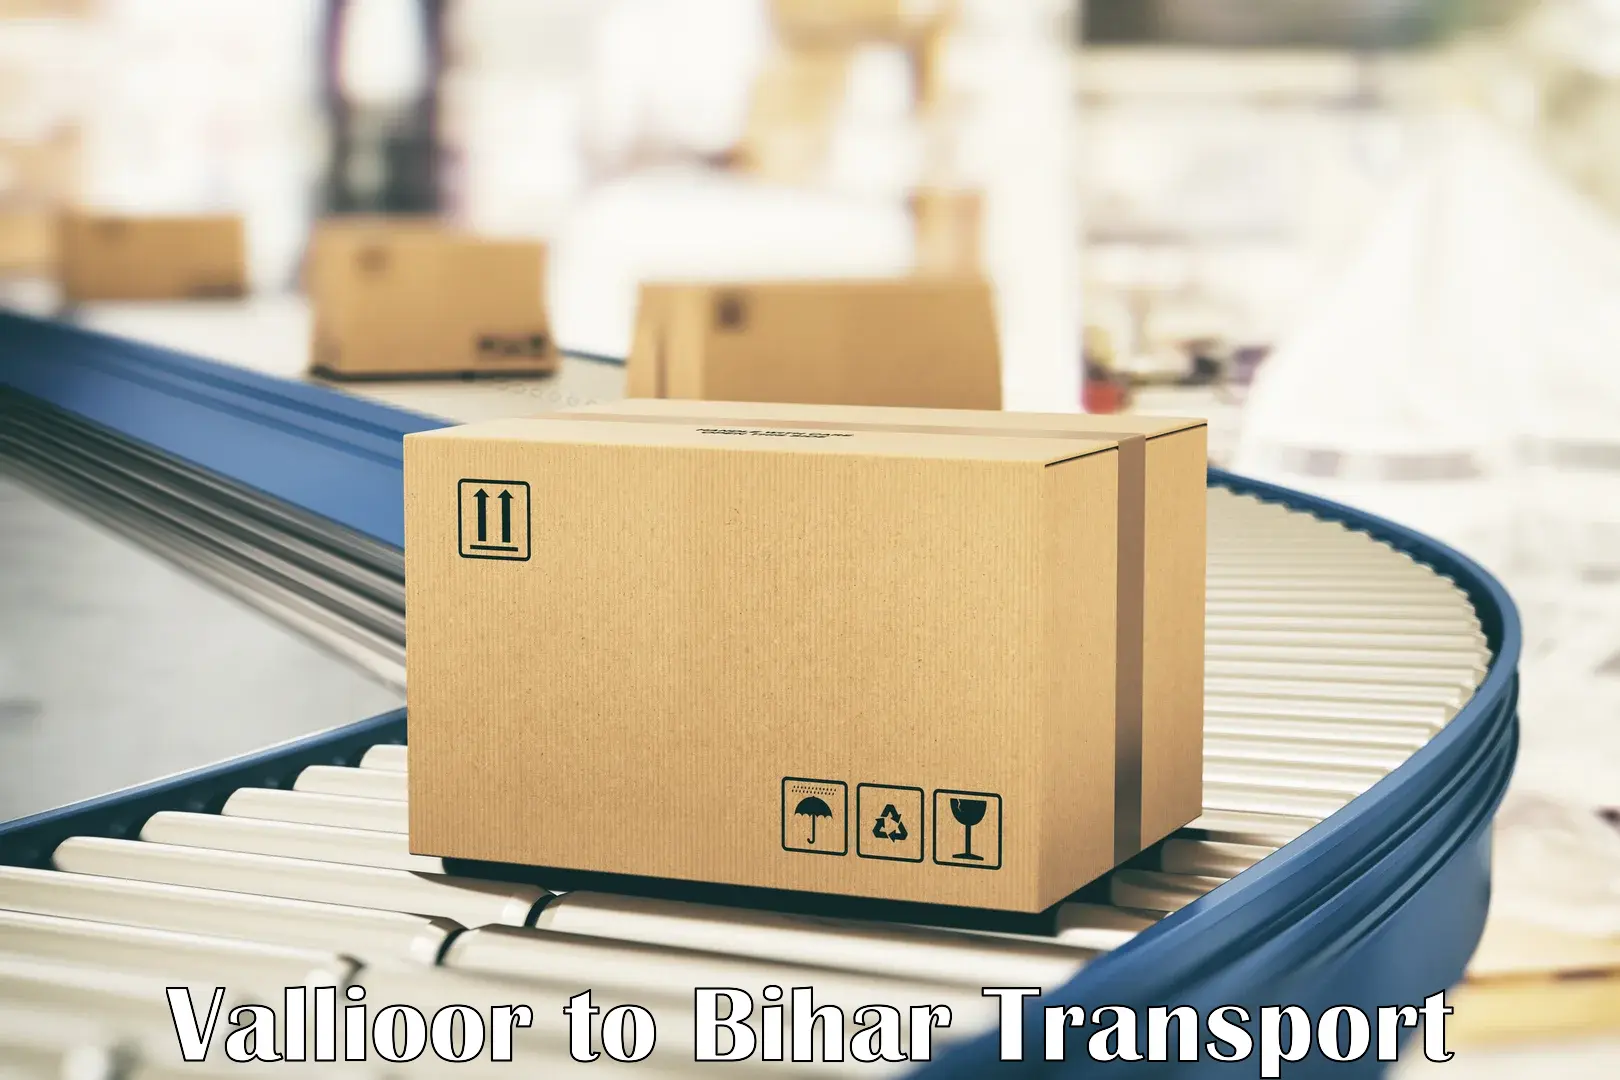 Part load transport service in India Vallioor to Punsia